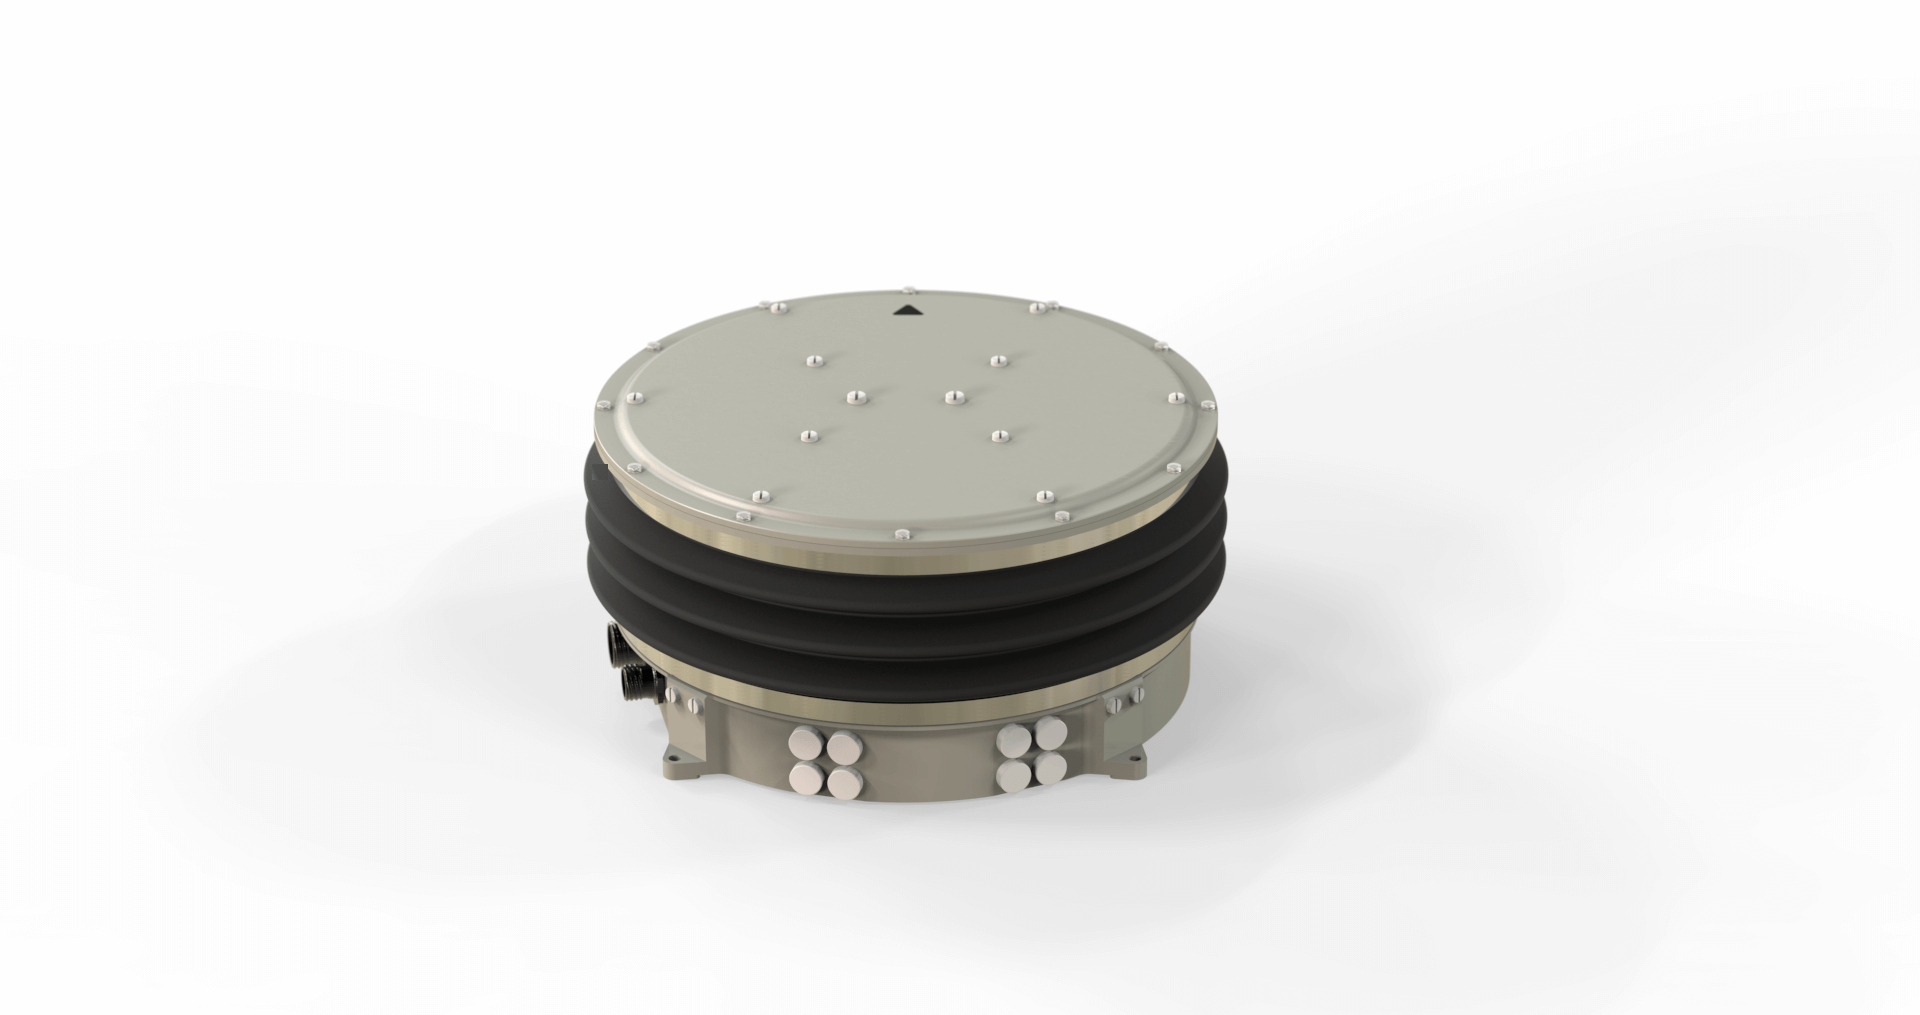 Gyro Stabilizer Mount for USV applications